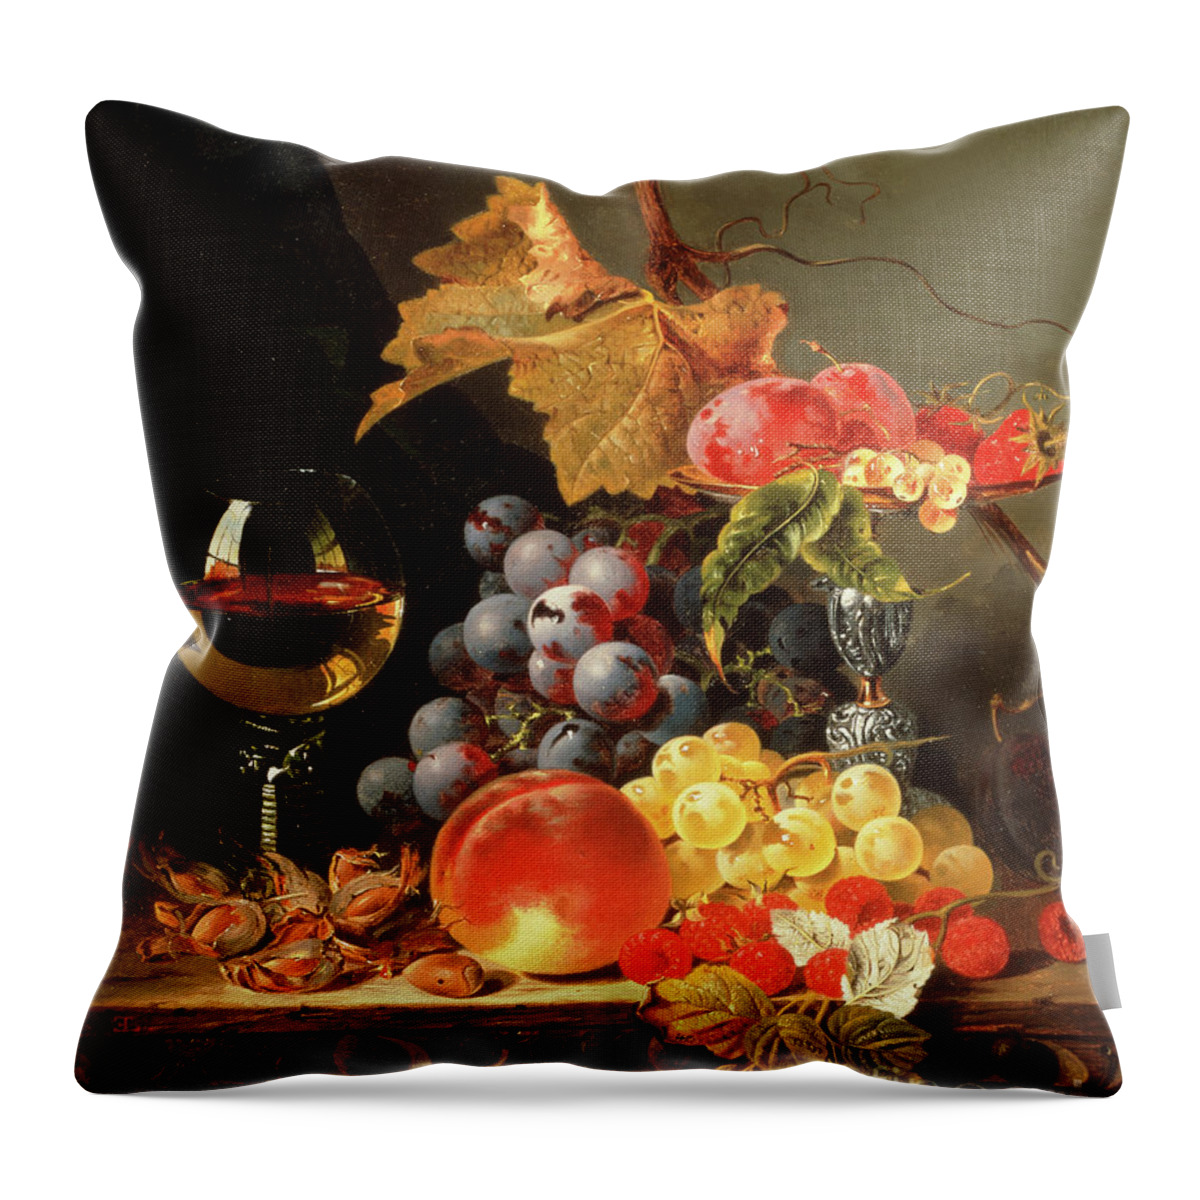 19th Century Throw Pillow featuring the painting Grapes, Plums, White Currants, Strawberries With Wine On A Wooden Ledge by Edward Ladell